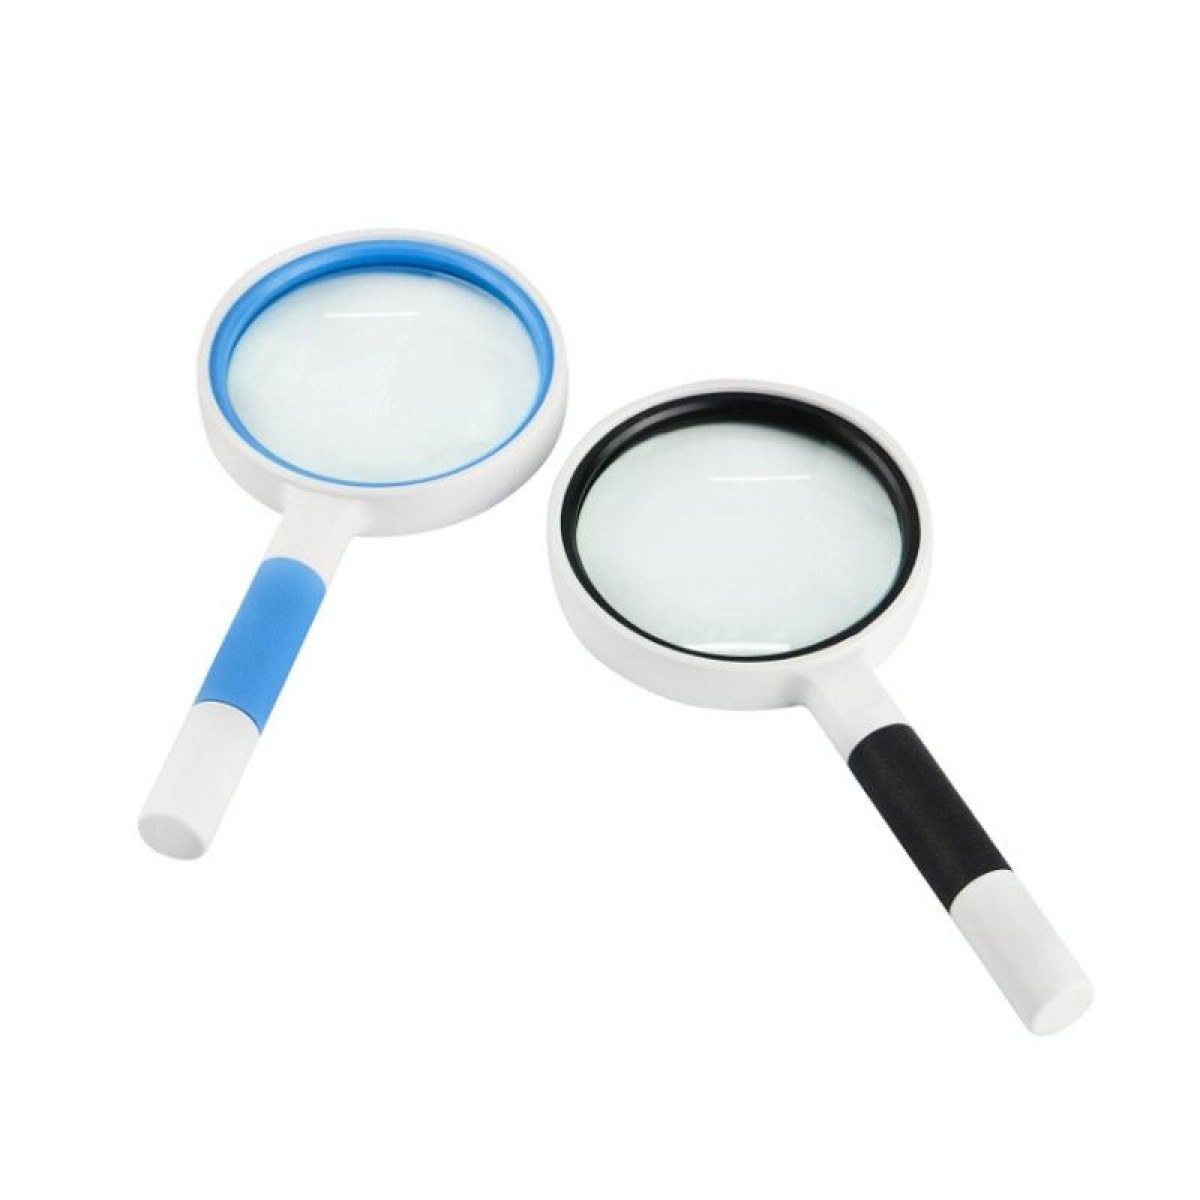 Hand-Held Reading Magnifier Glass Lens Anti-Skid Handle Old Man Reading Repair Identification Magnifying Glass, Specification: 75mm 4 Times (Blue White)